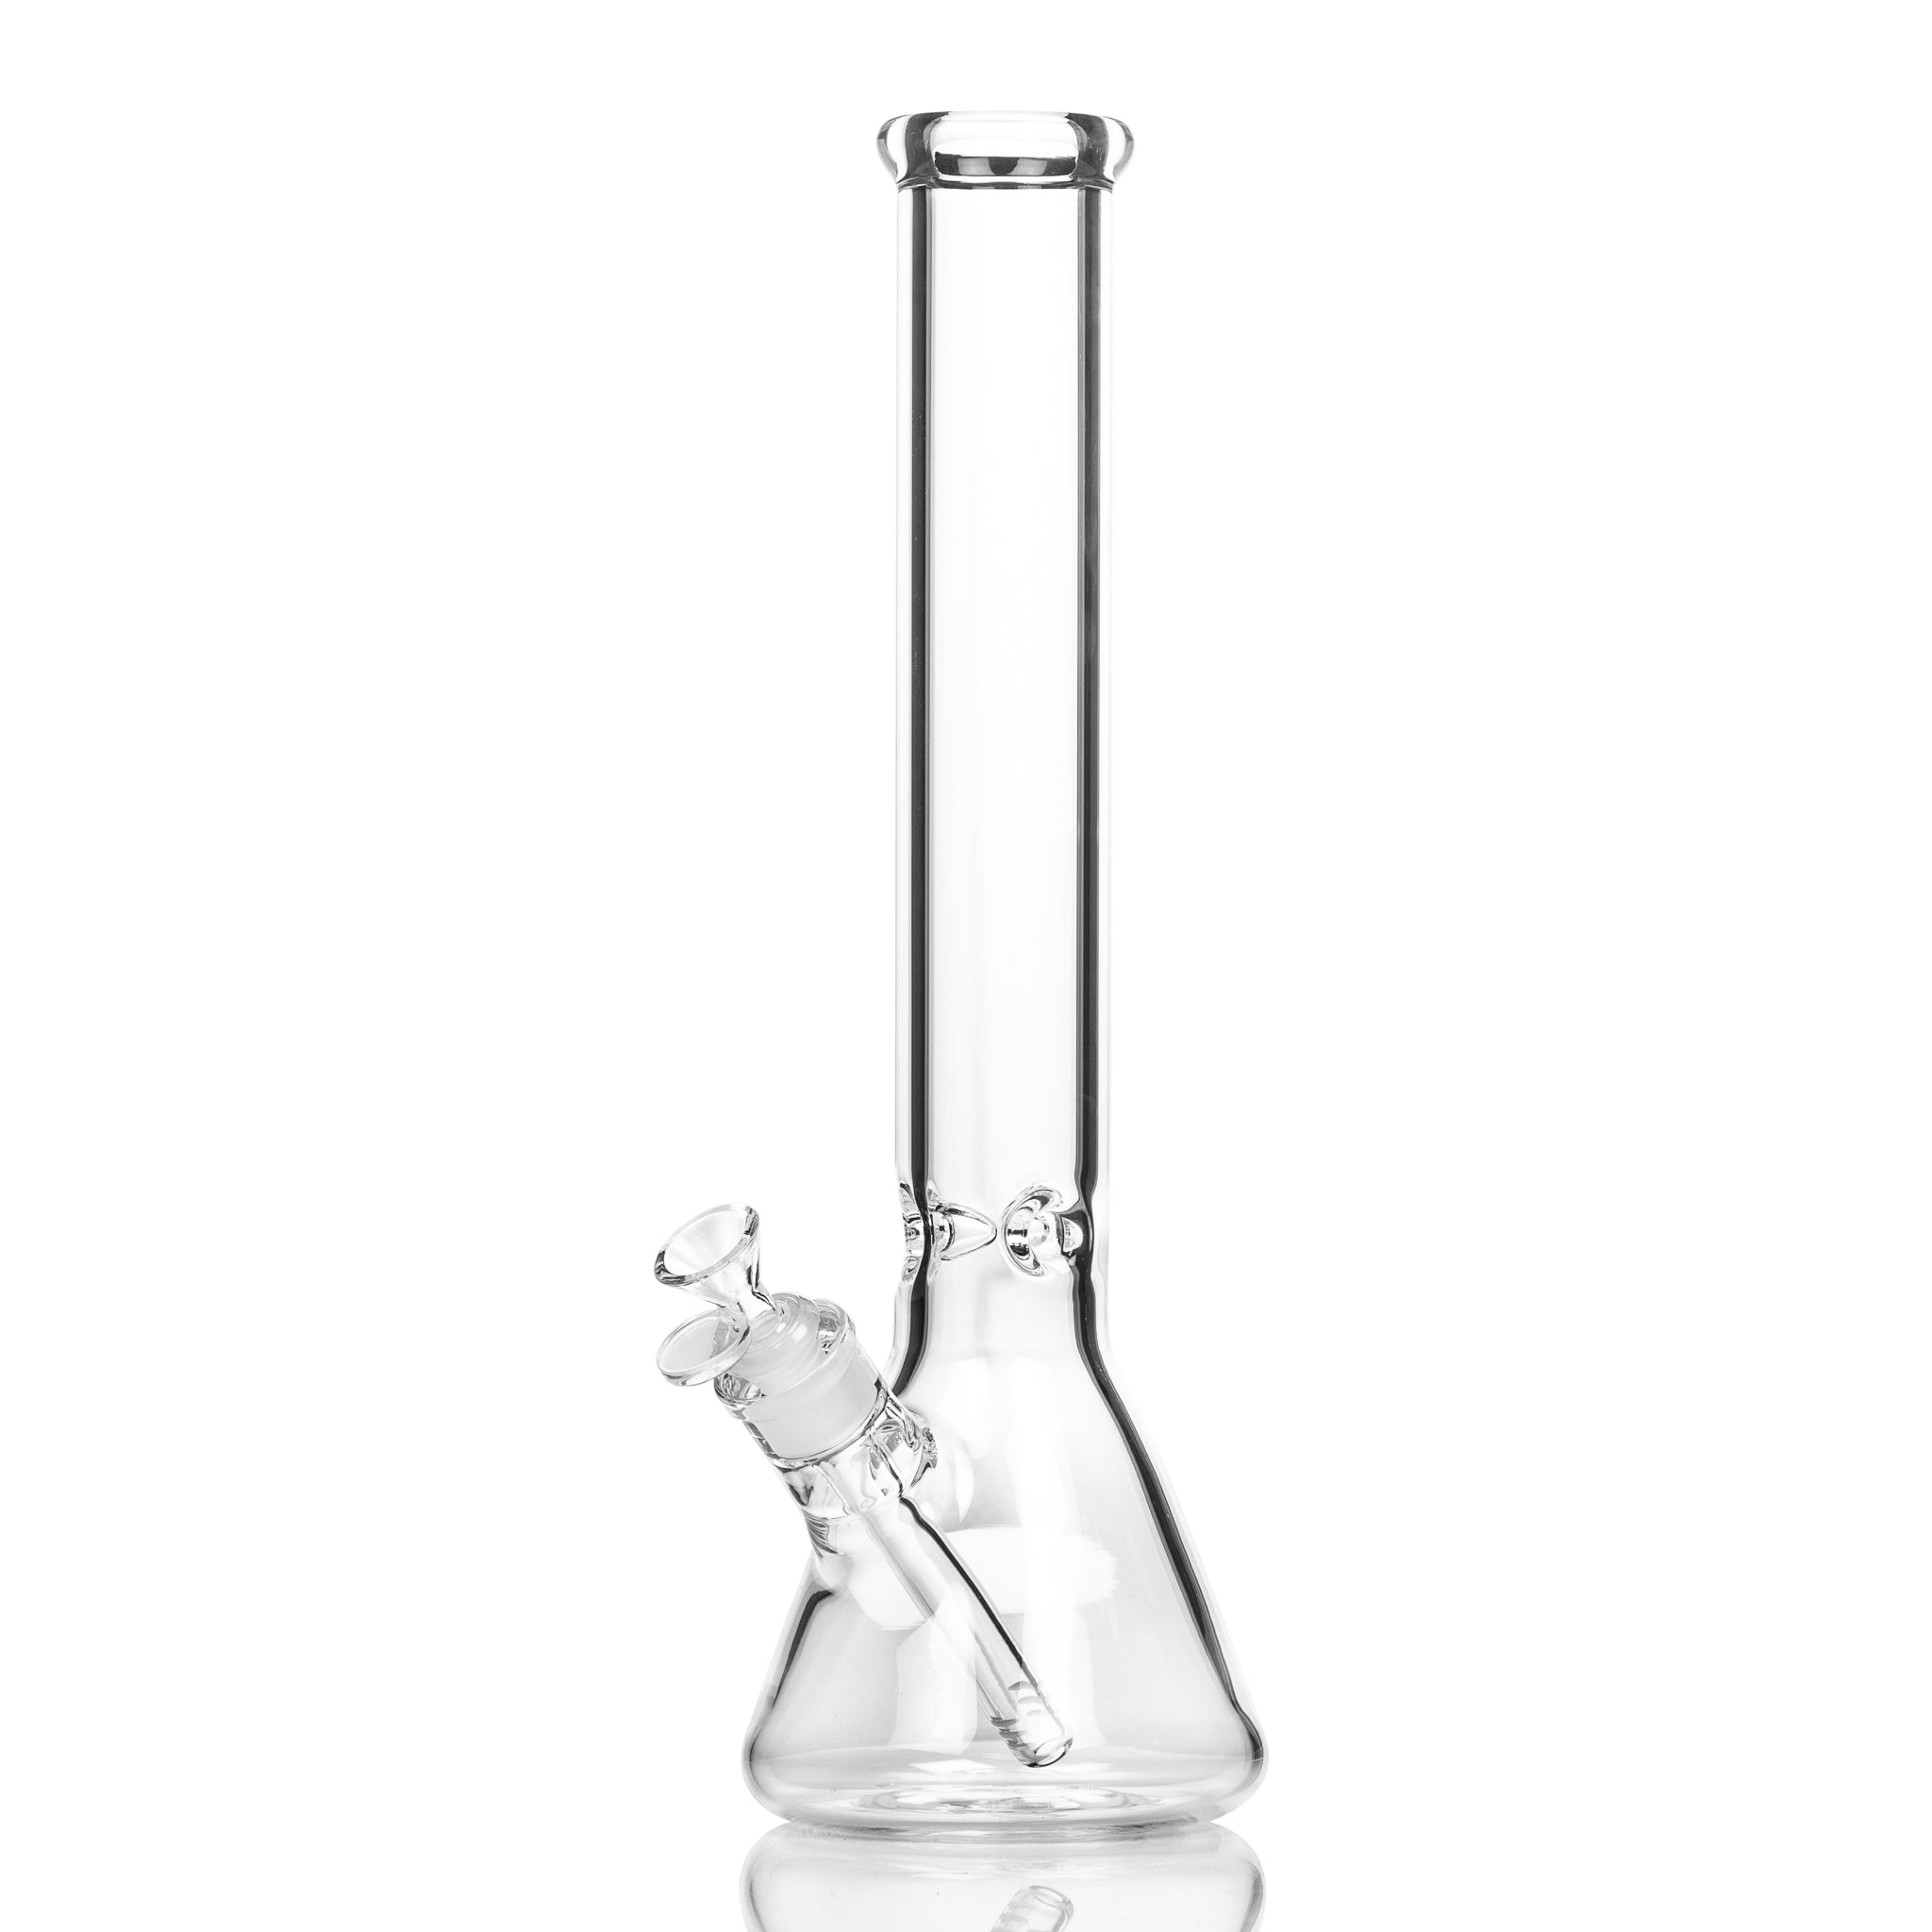 Cheap glass beaker bong with down stem and cone piece.